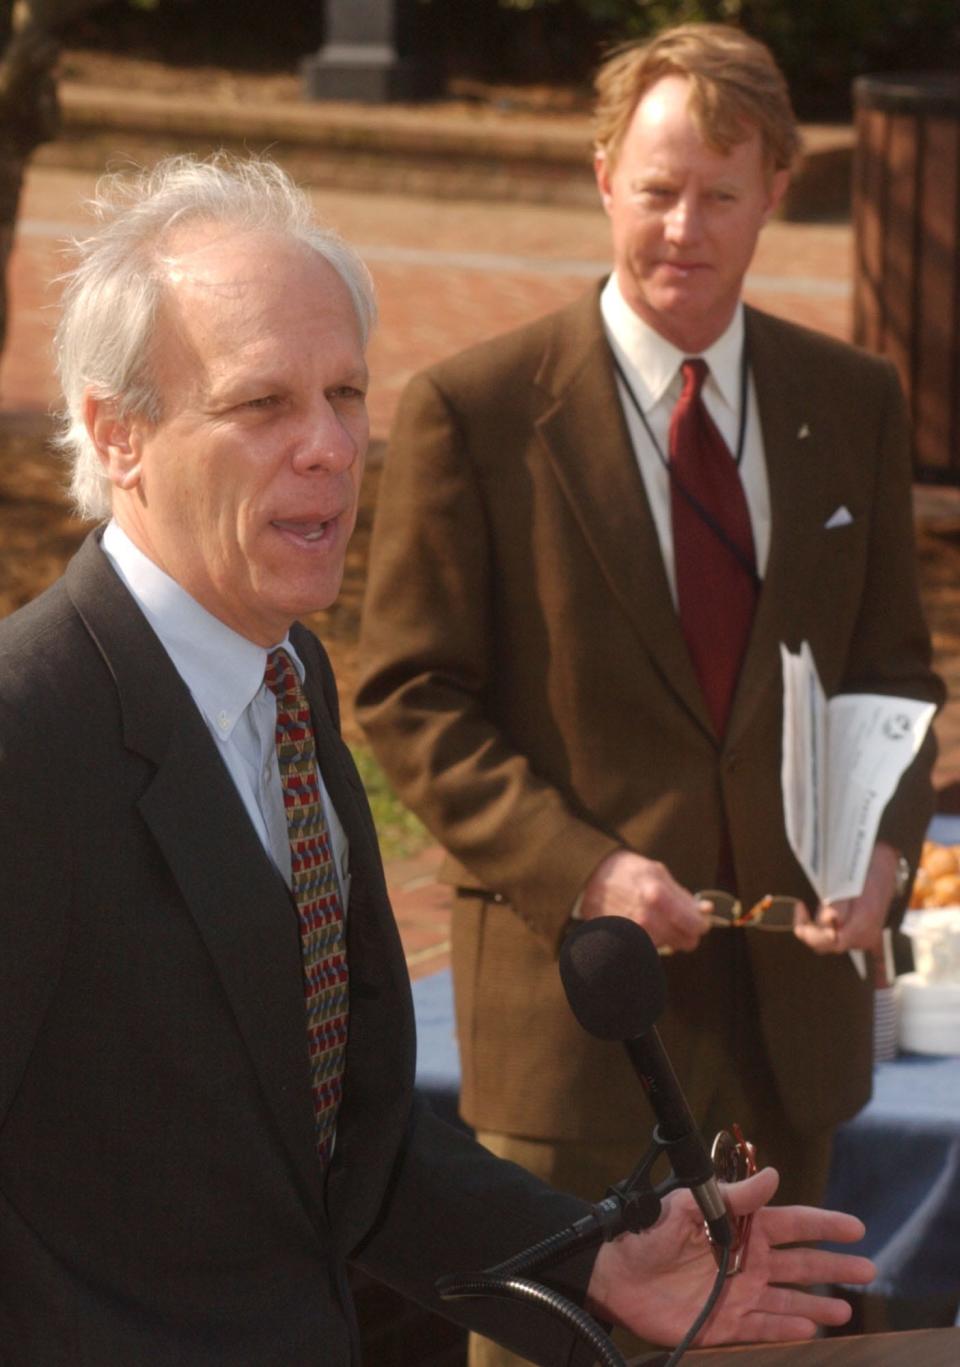 Then-Maryland state Sen. Paul Pinsky from Prince George's County, left, with Will Baker, then-president of the Chesapeake Bay Foundation, speaks in this 2004 file phot during a press conference outside the Capitol in Annapolis.